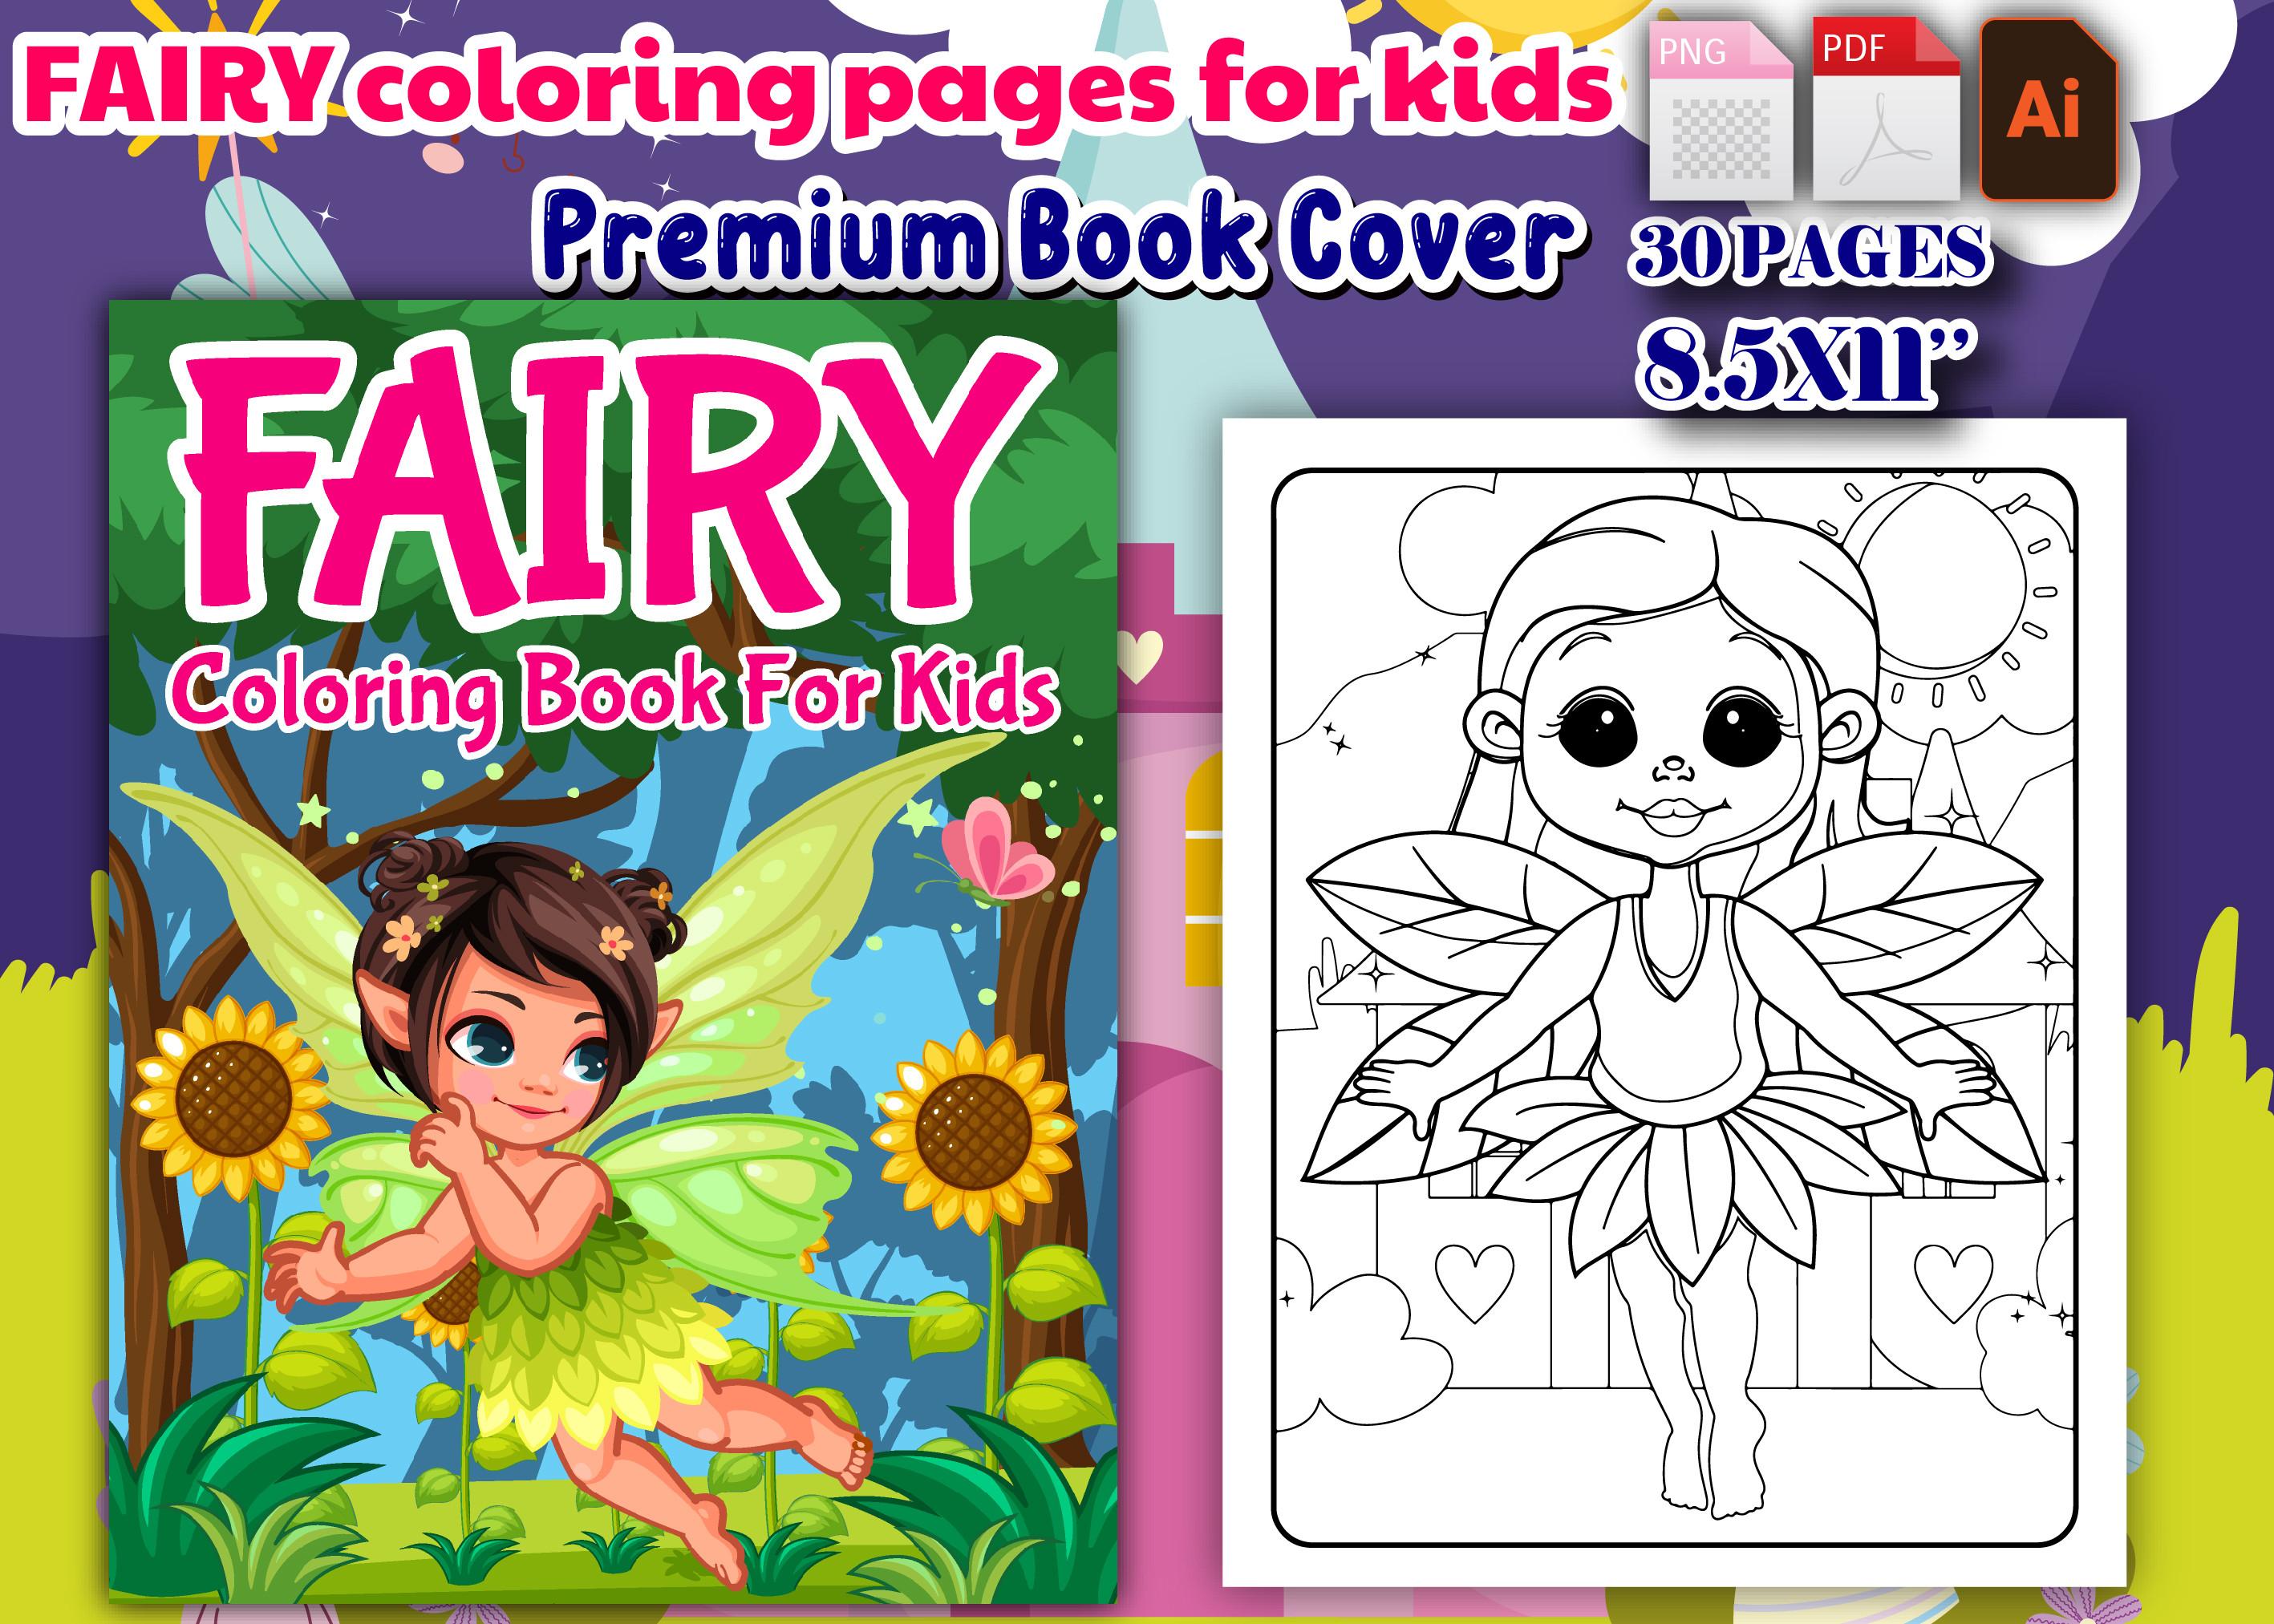 Fairy Coloring Pages for Kids